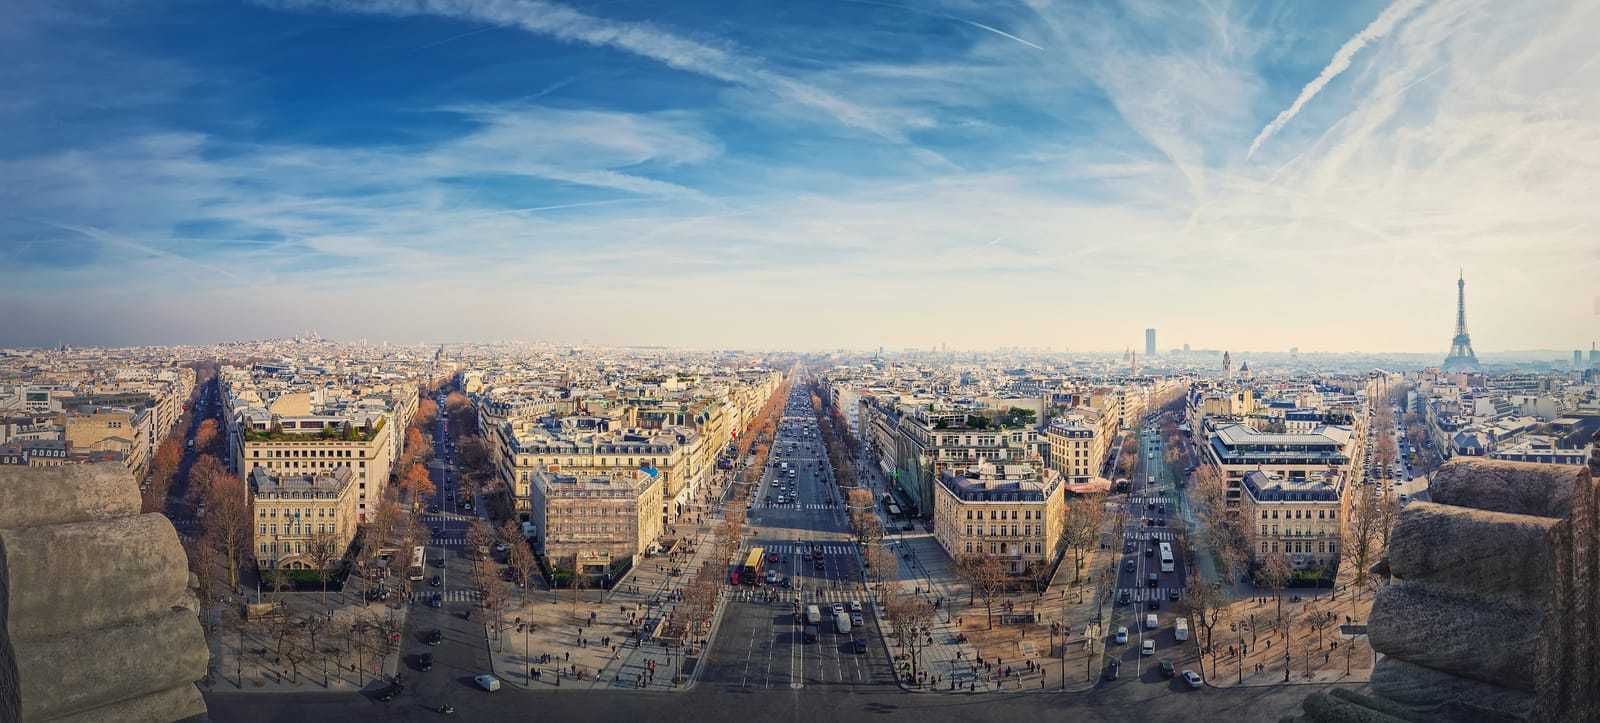 Paris in 12 Hours - Here's what you should see!